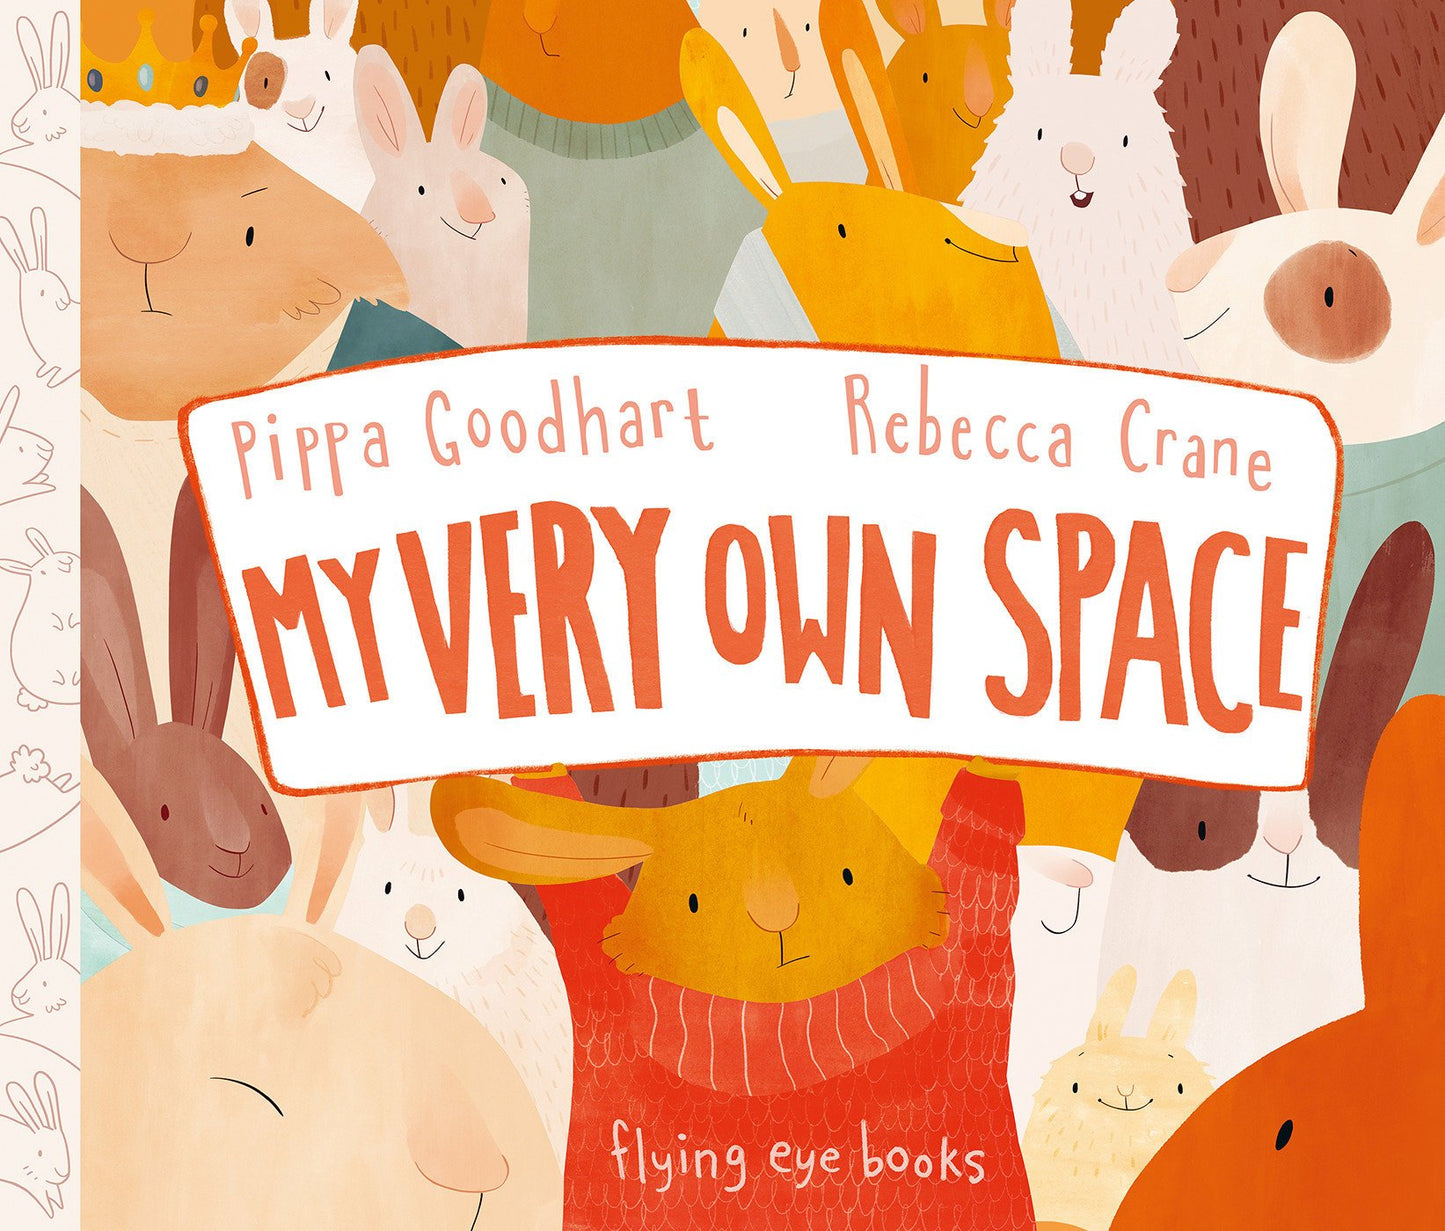 My Very Own Space By Pippa Goodhart and Rebecca Crane